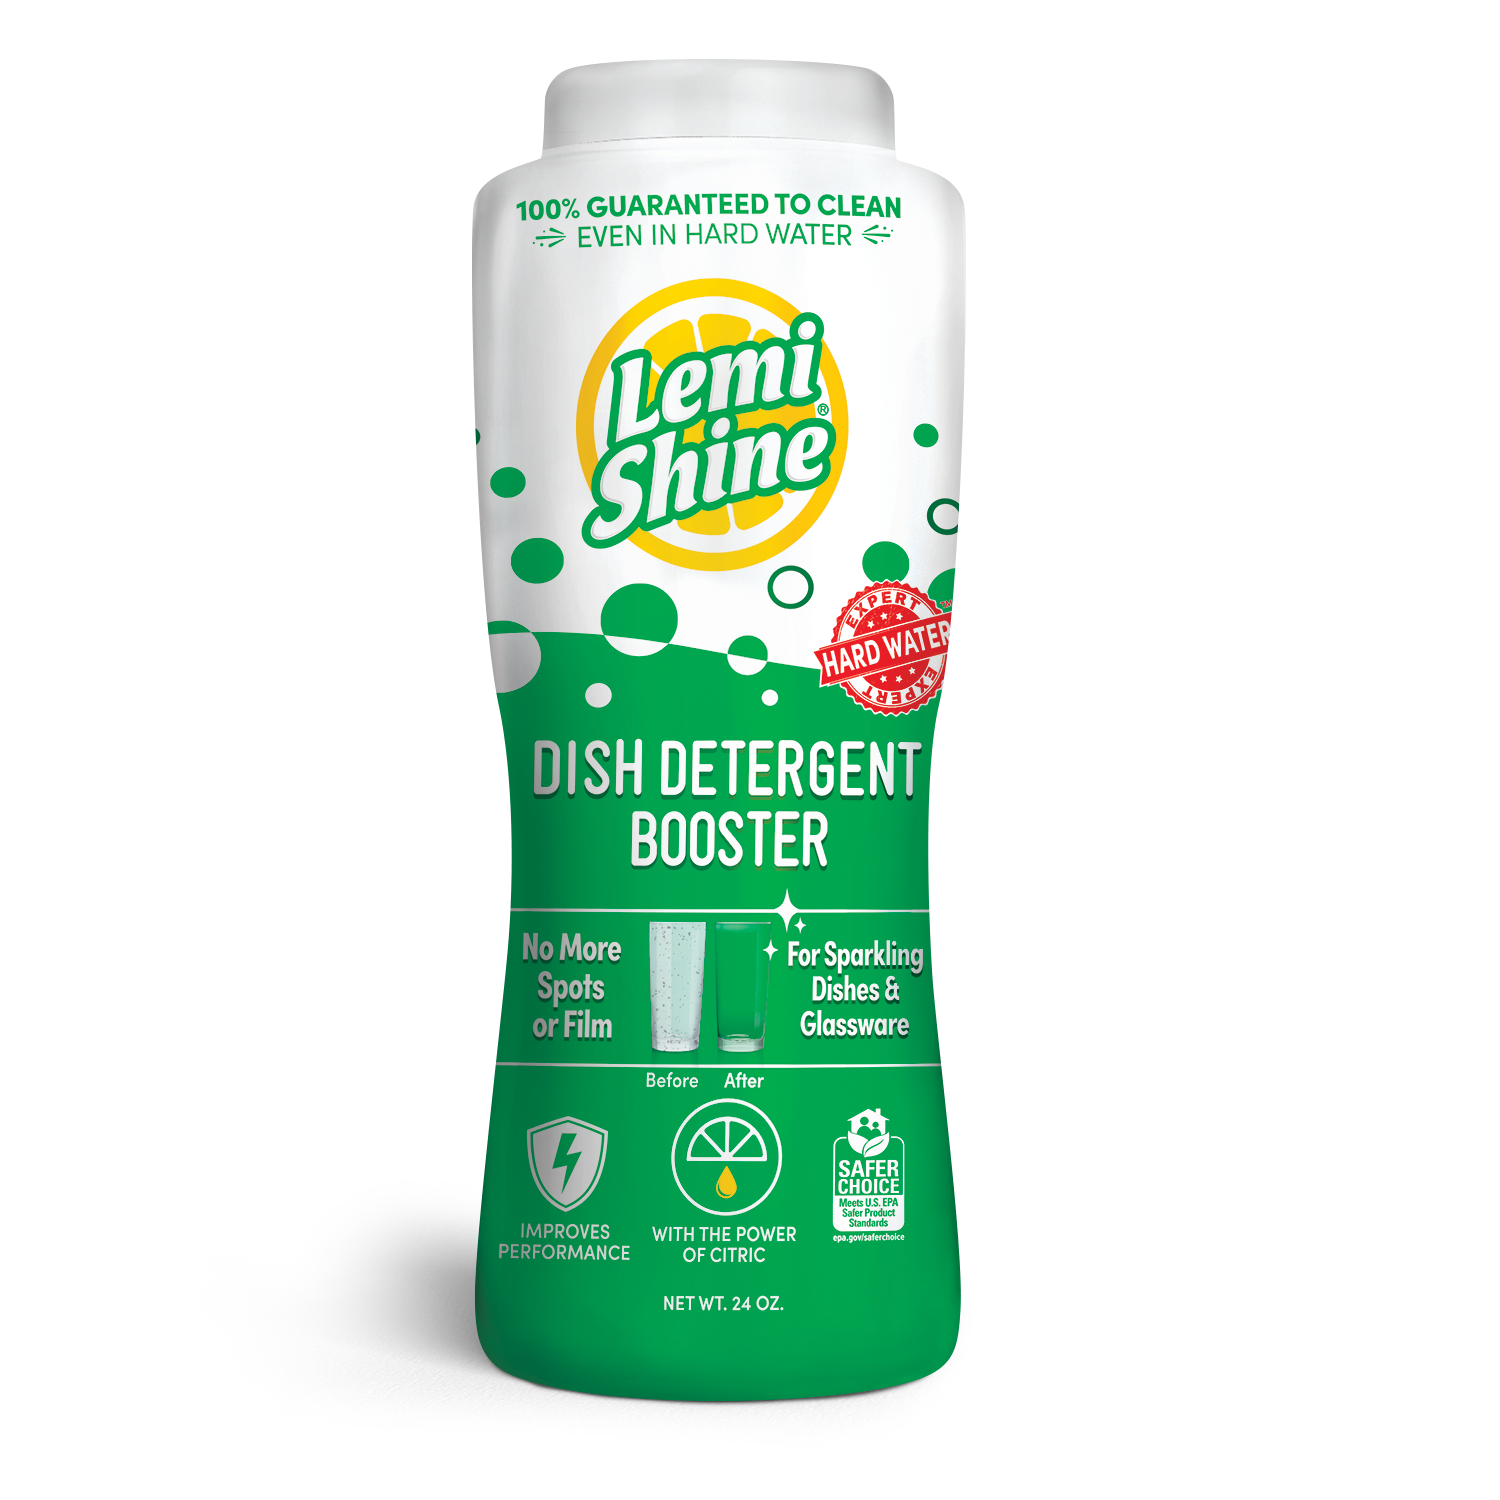 Lemi Shine Dish Detergent Booster, Gets Rid of Hard Water Spots, 24 oz. - image 1 of 11